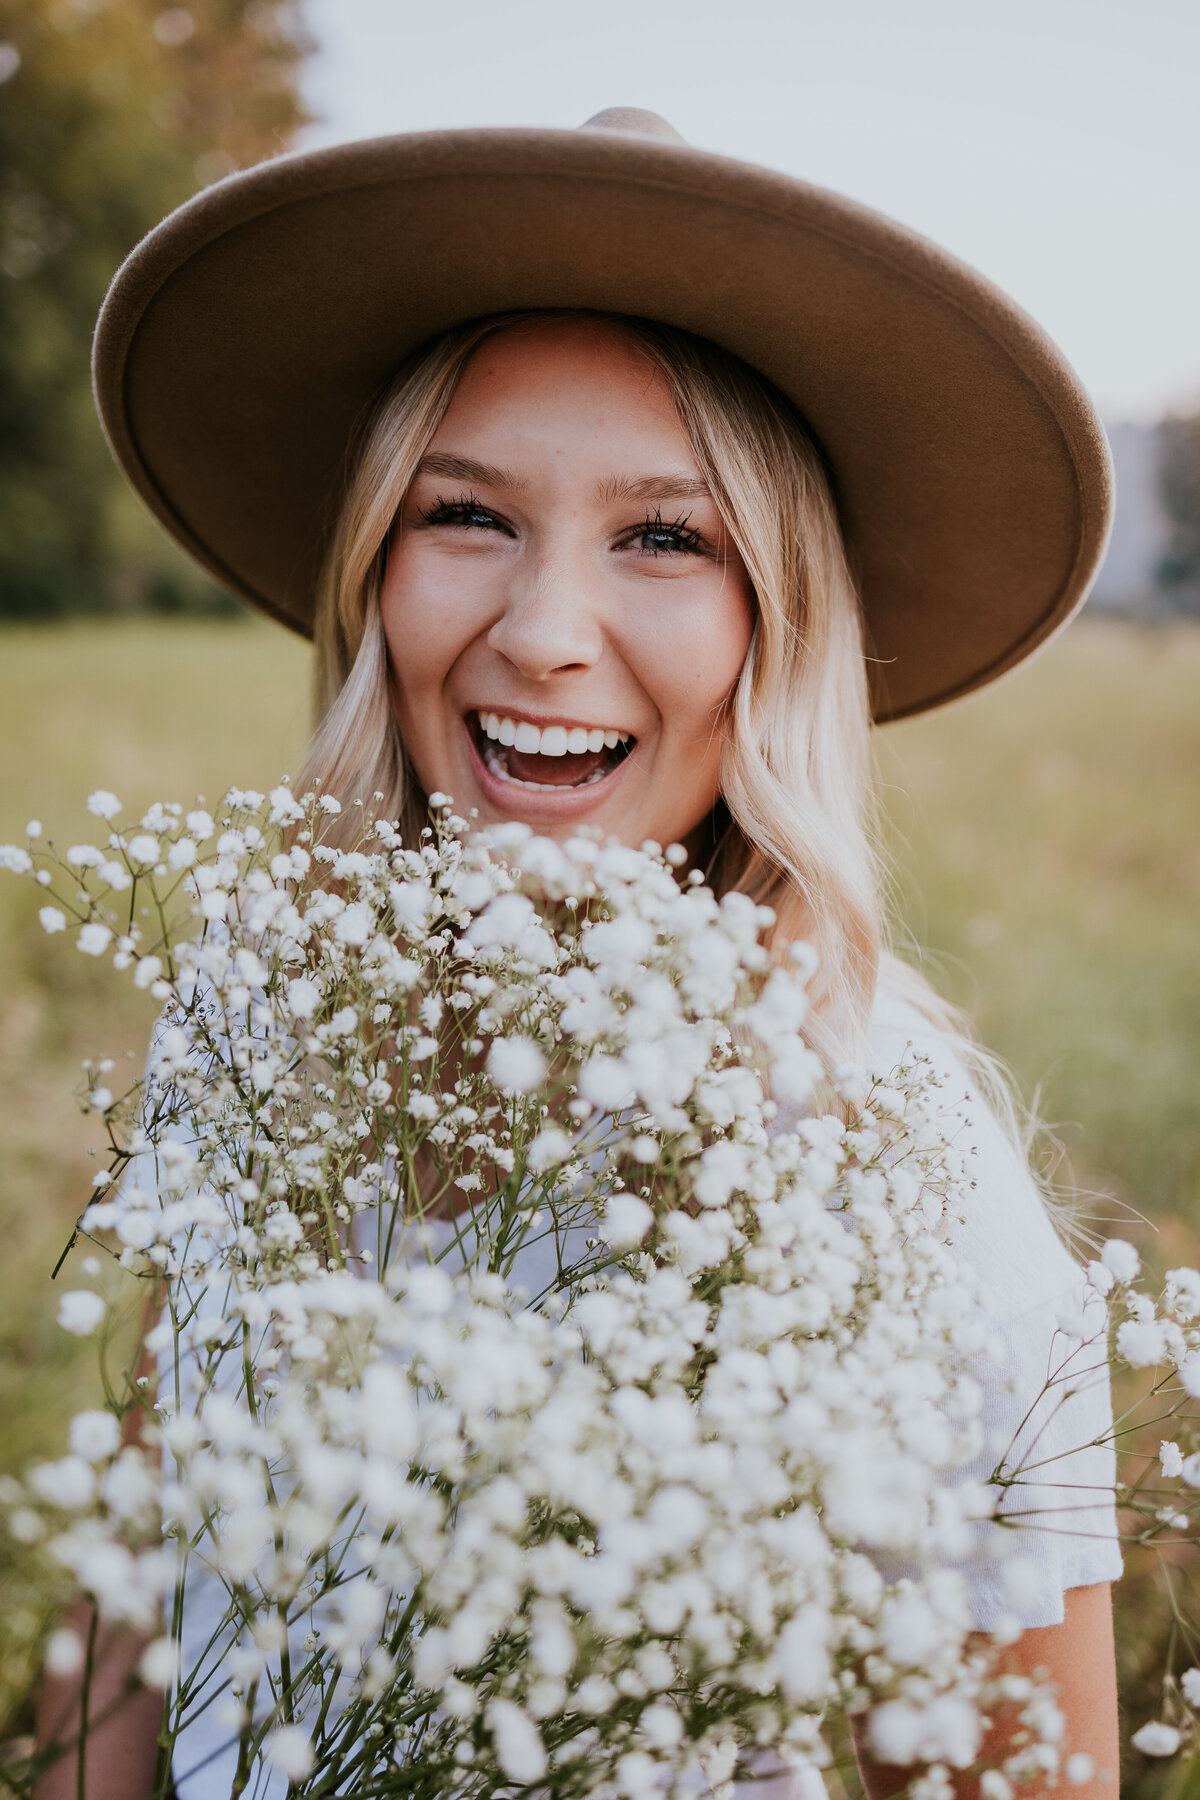 Young woman laughs behind bouquet of babies breath flowers.